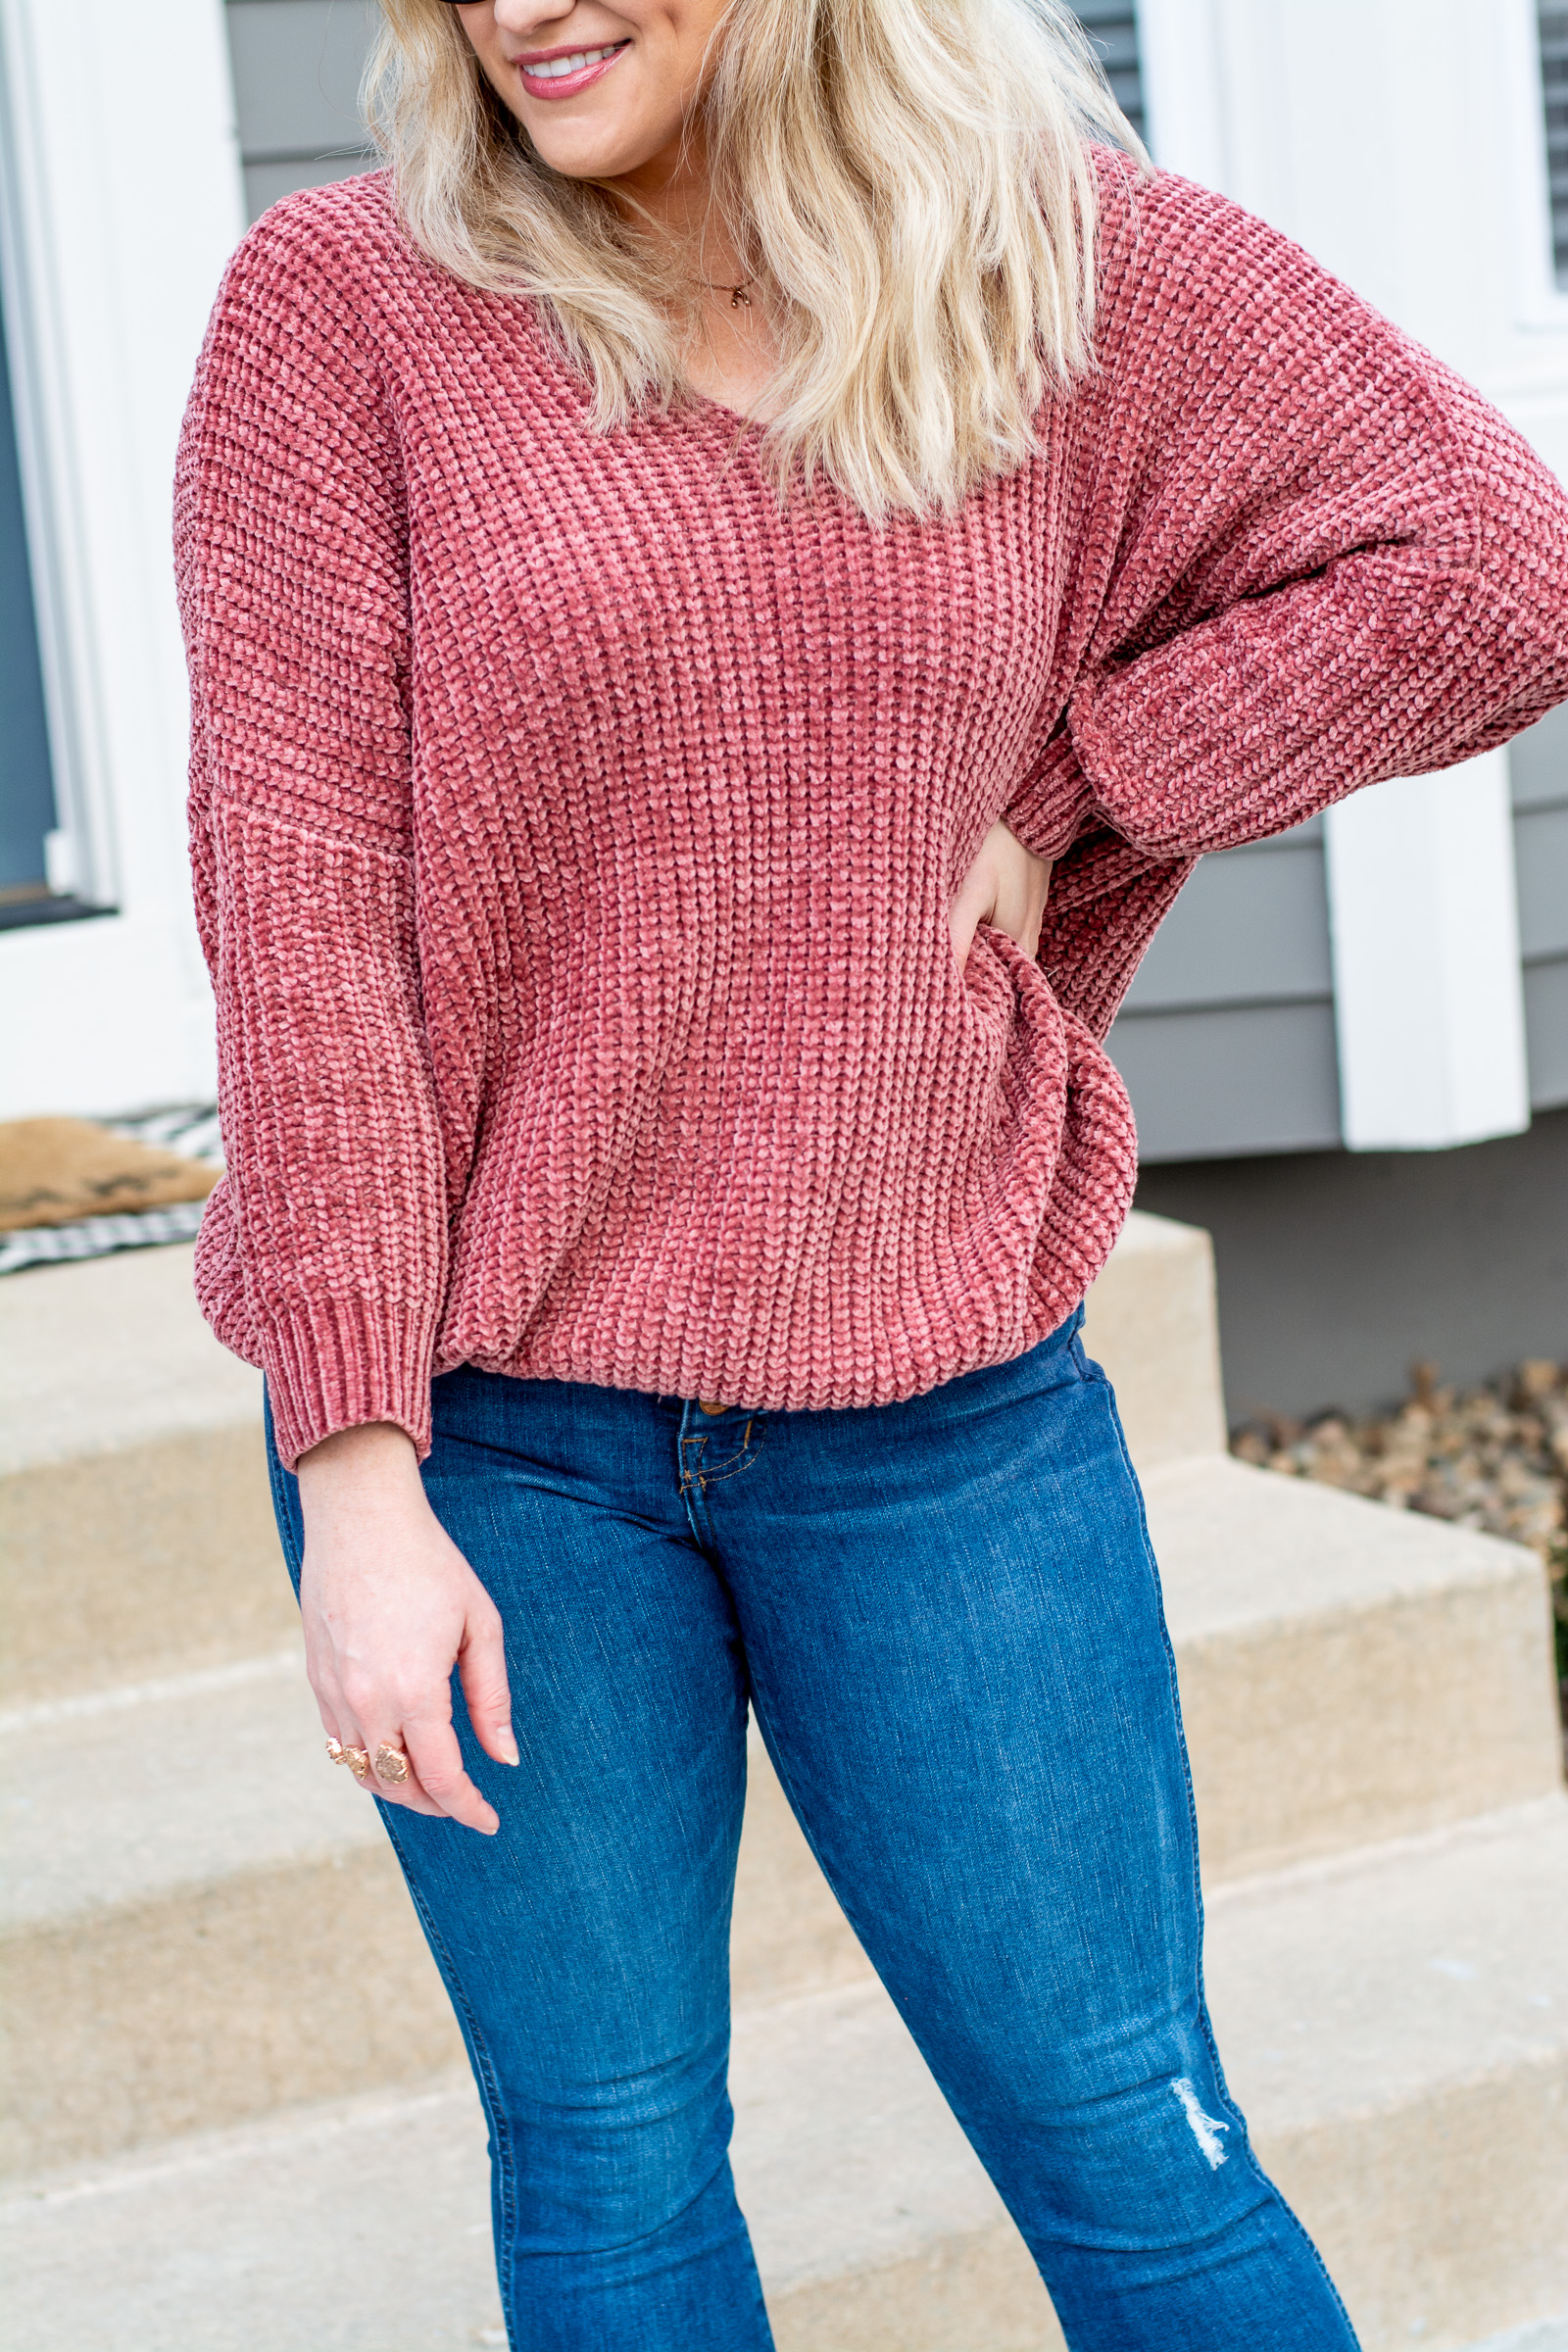 Must-have: Mauve Chenille Pullover. | LSR